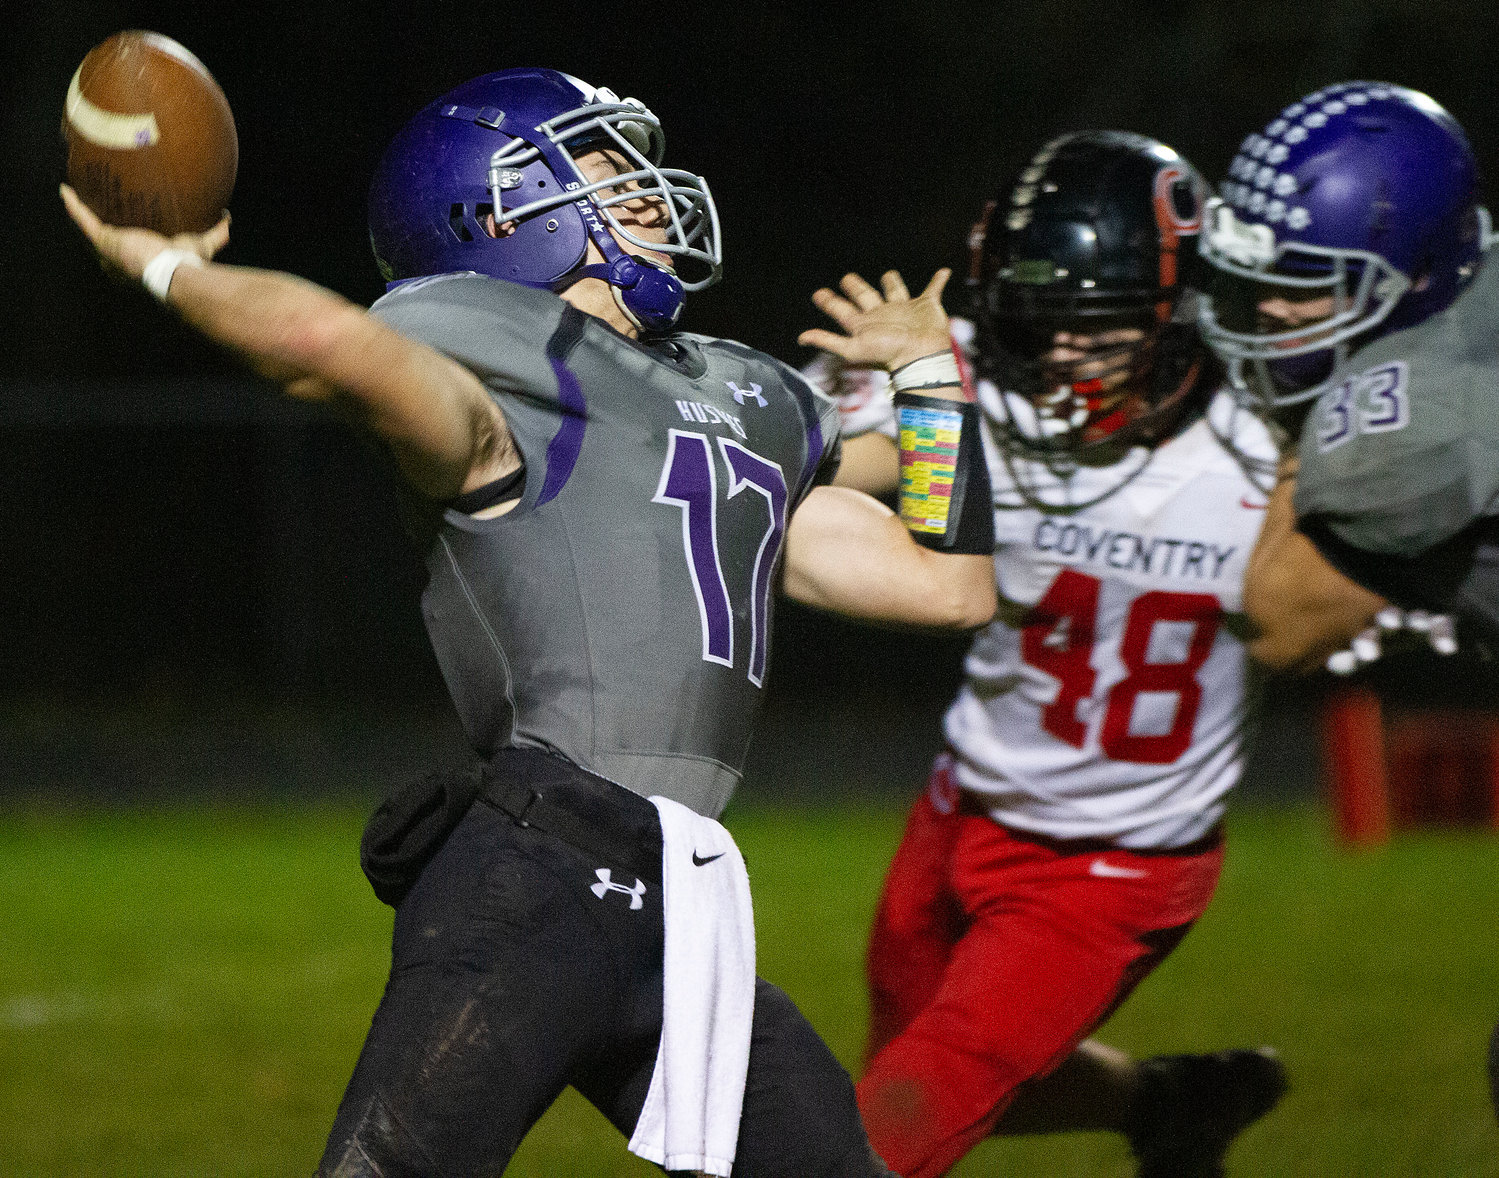 Quarterback Riley Howland heaves a pass to Ben Colouro to set up a Brock Pacheco score in the third quarter.